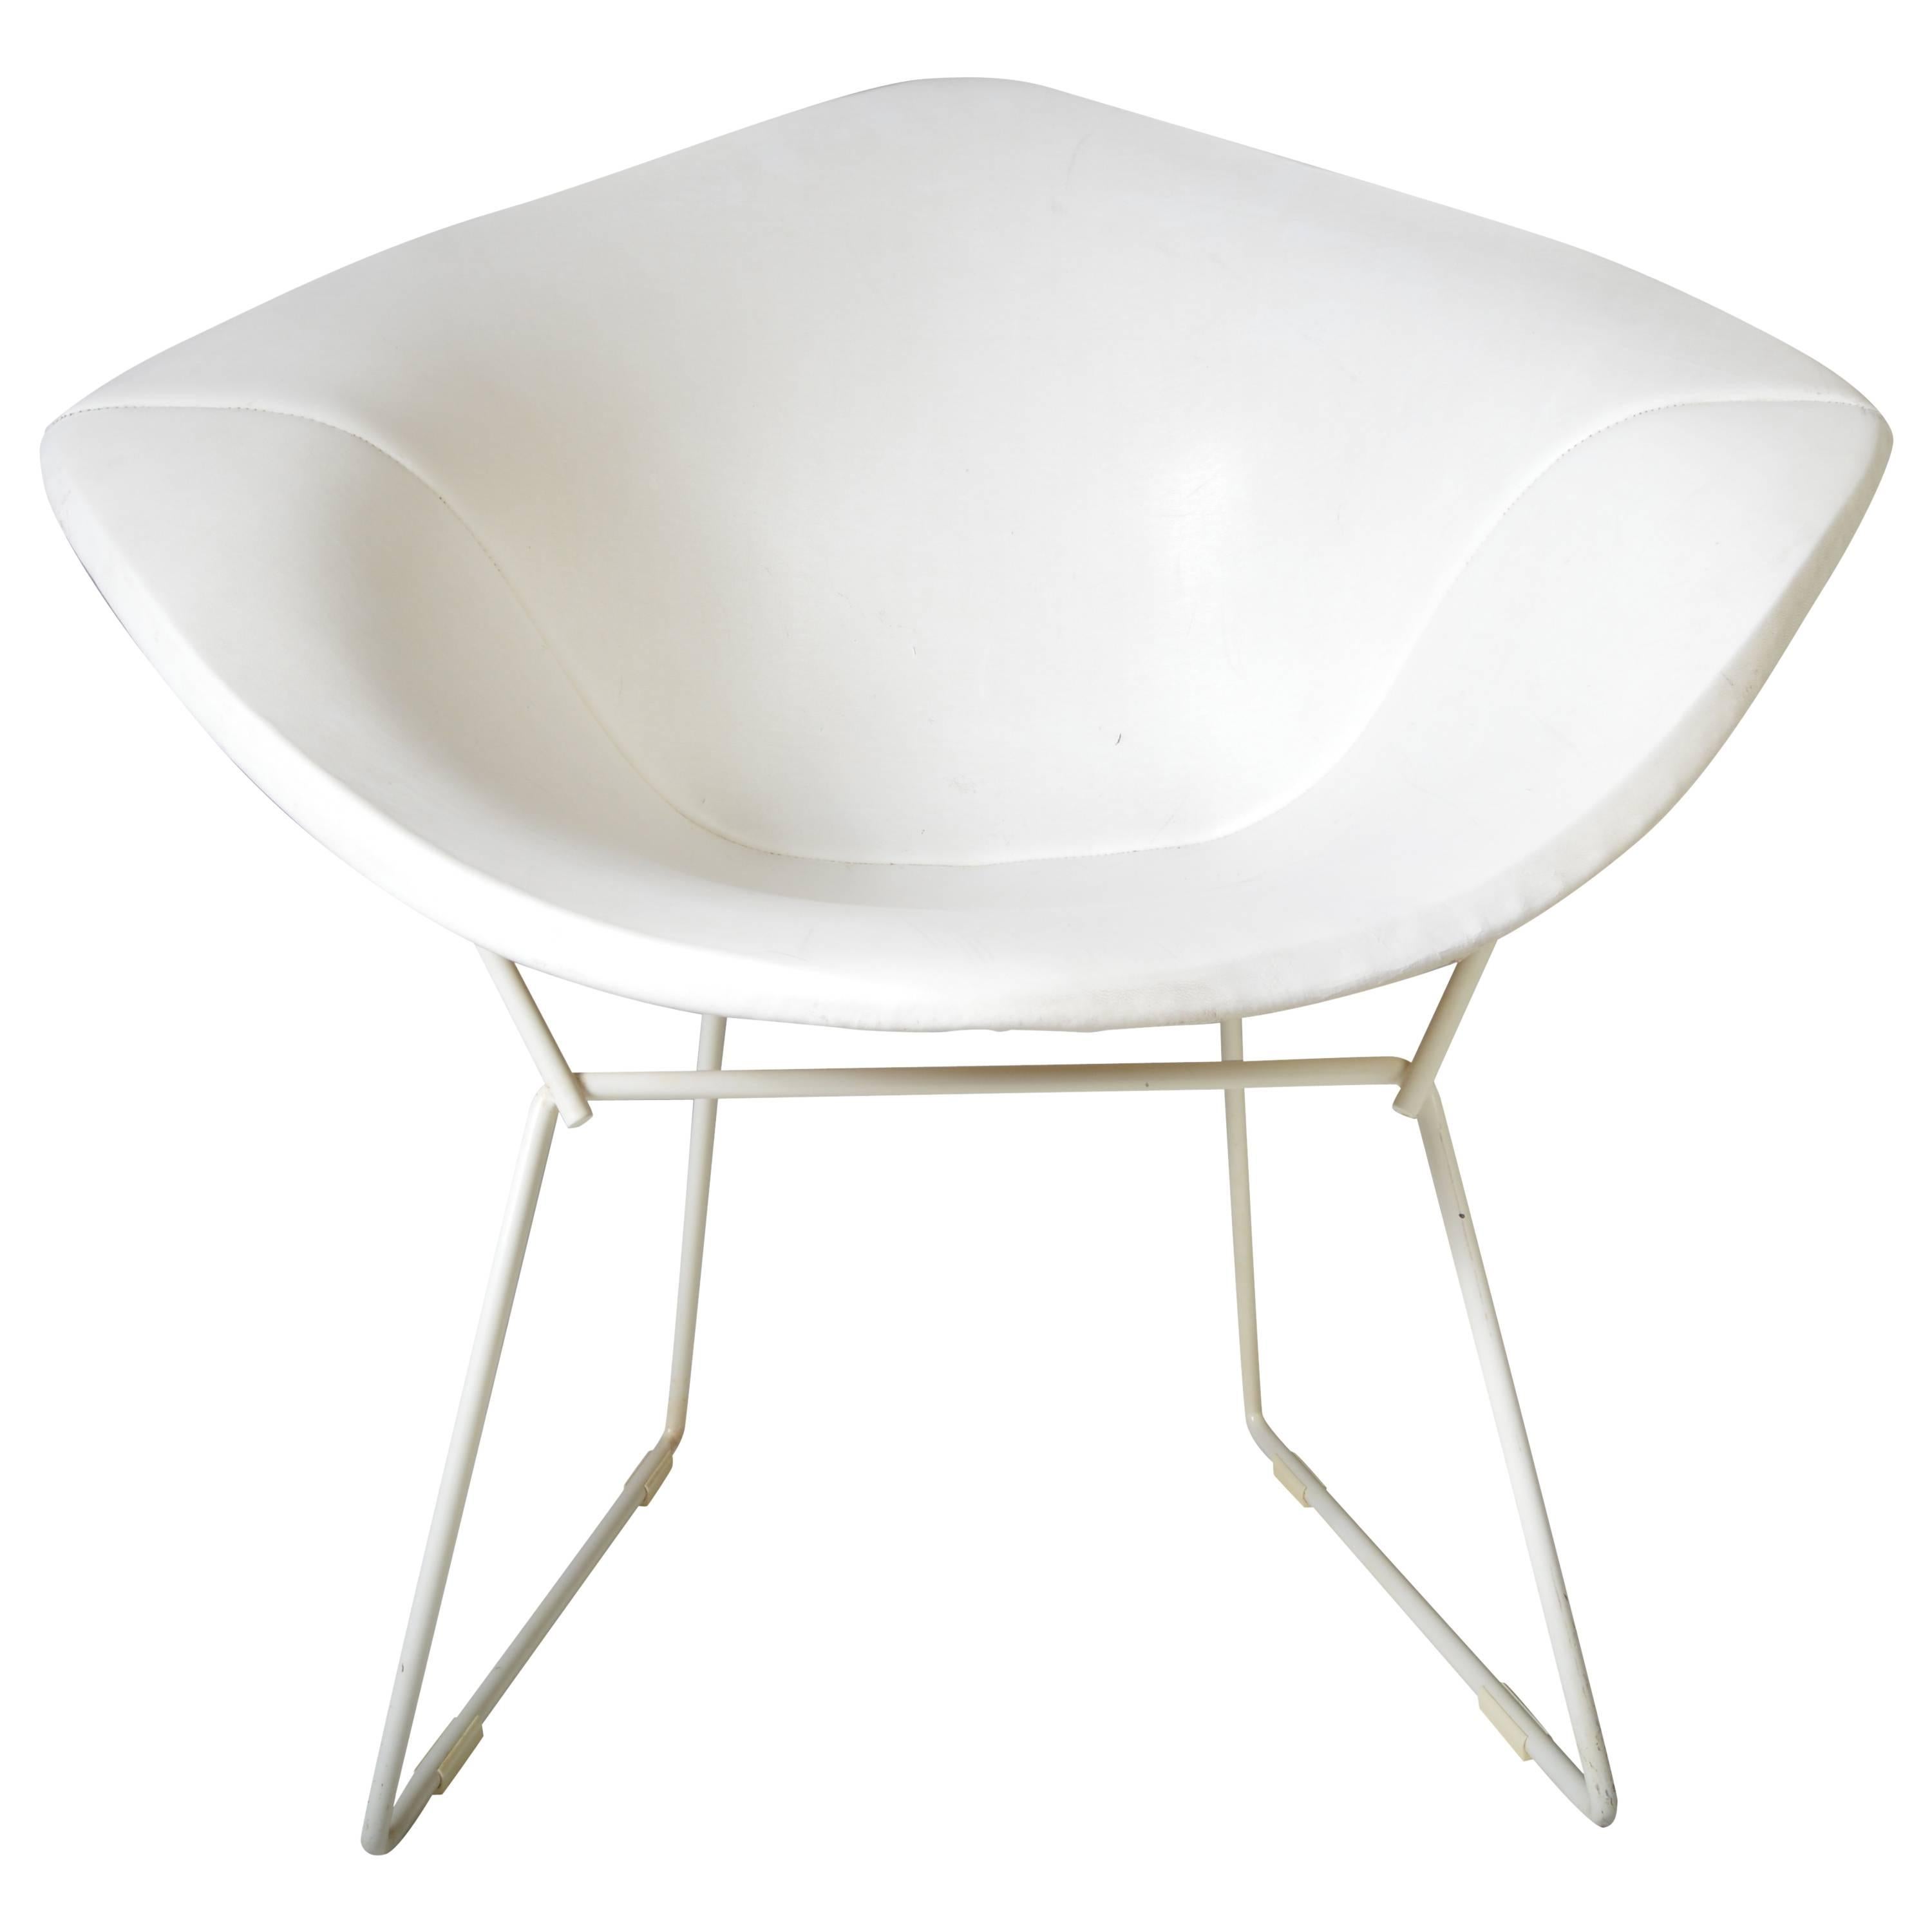 Early Harry Bertoia for Knoll Diamond Chair in Rare White with White Leather